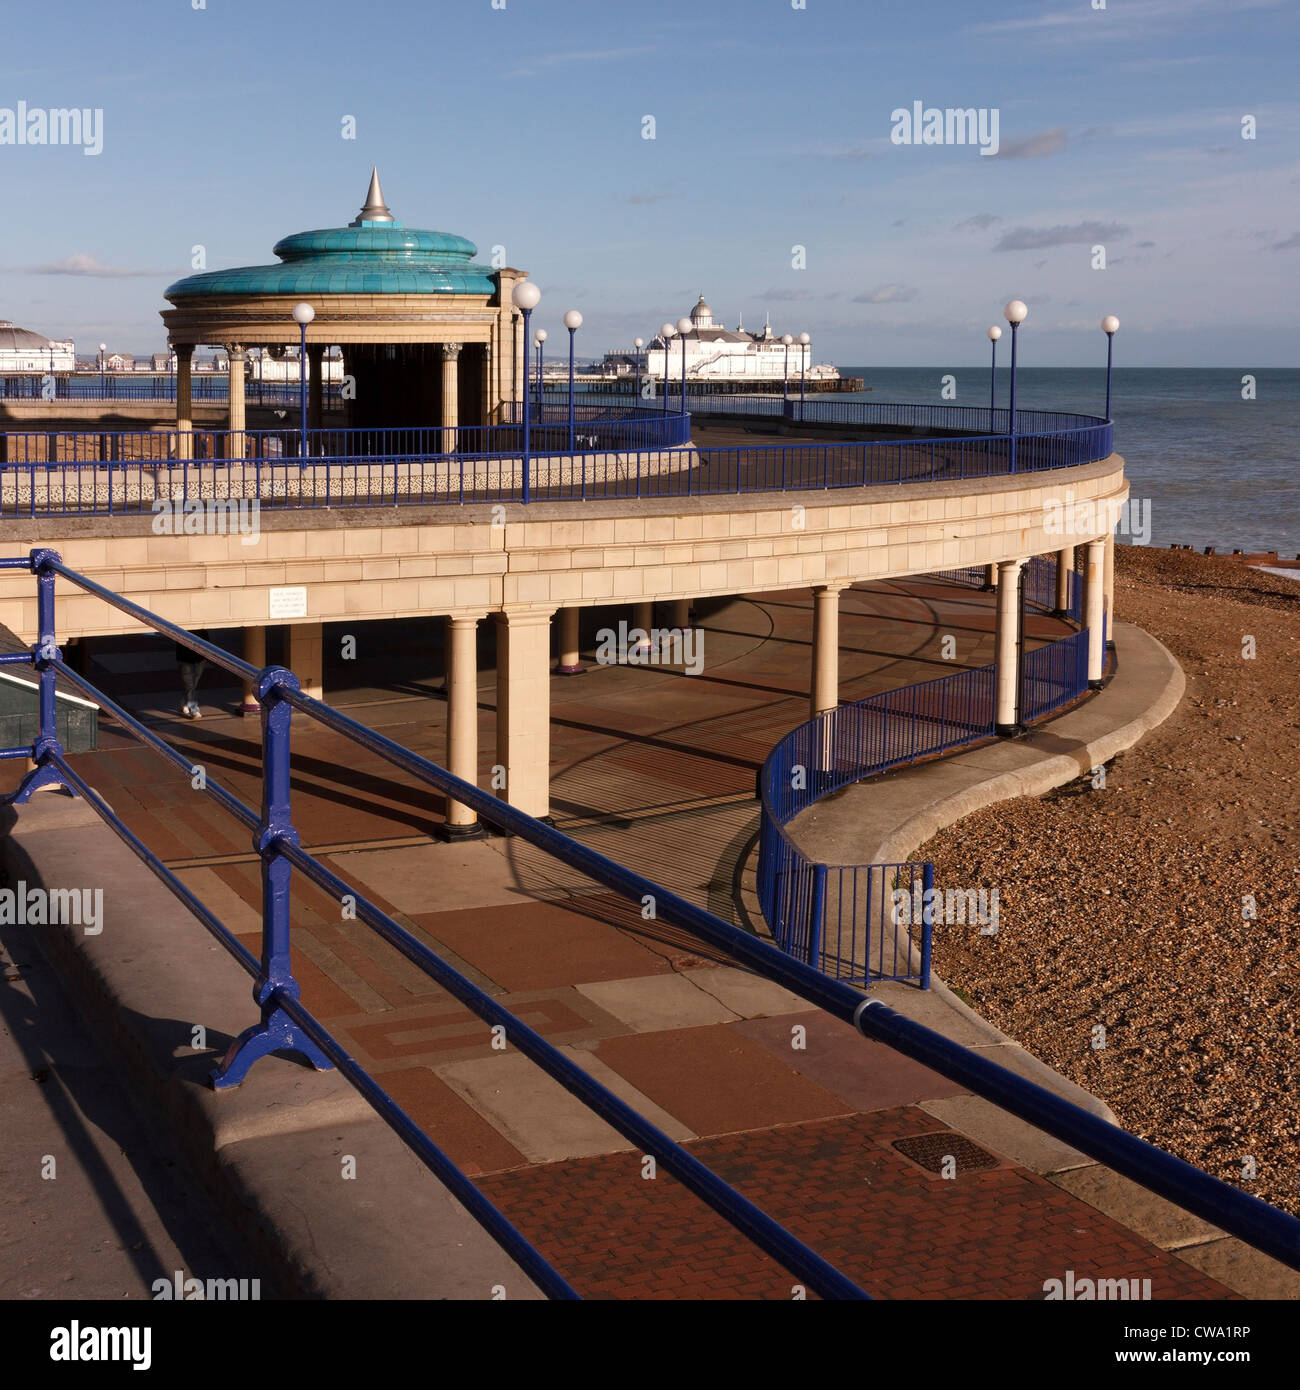 Eastbourne Bandstand, promenade and railings with pier beyond, Eastbourne, East Sussex, England, UK Stock Photo